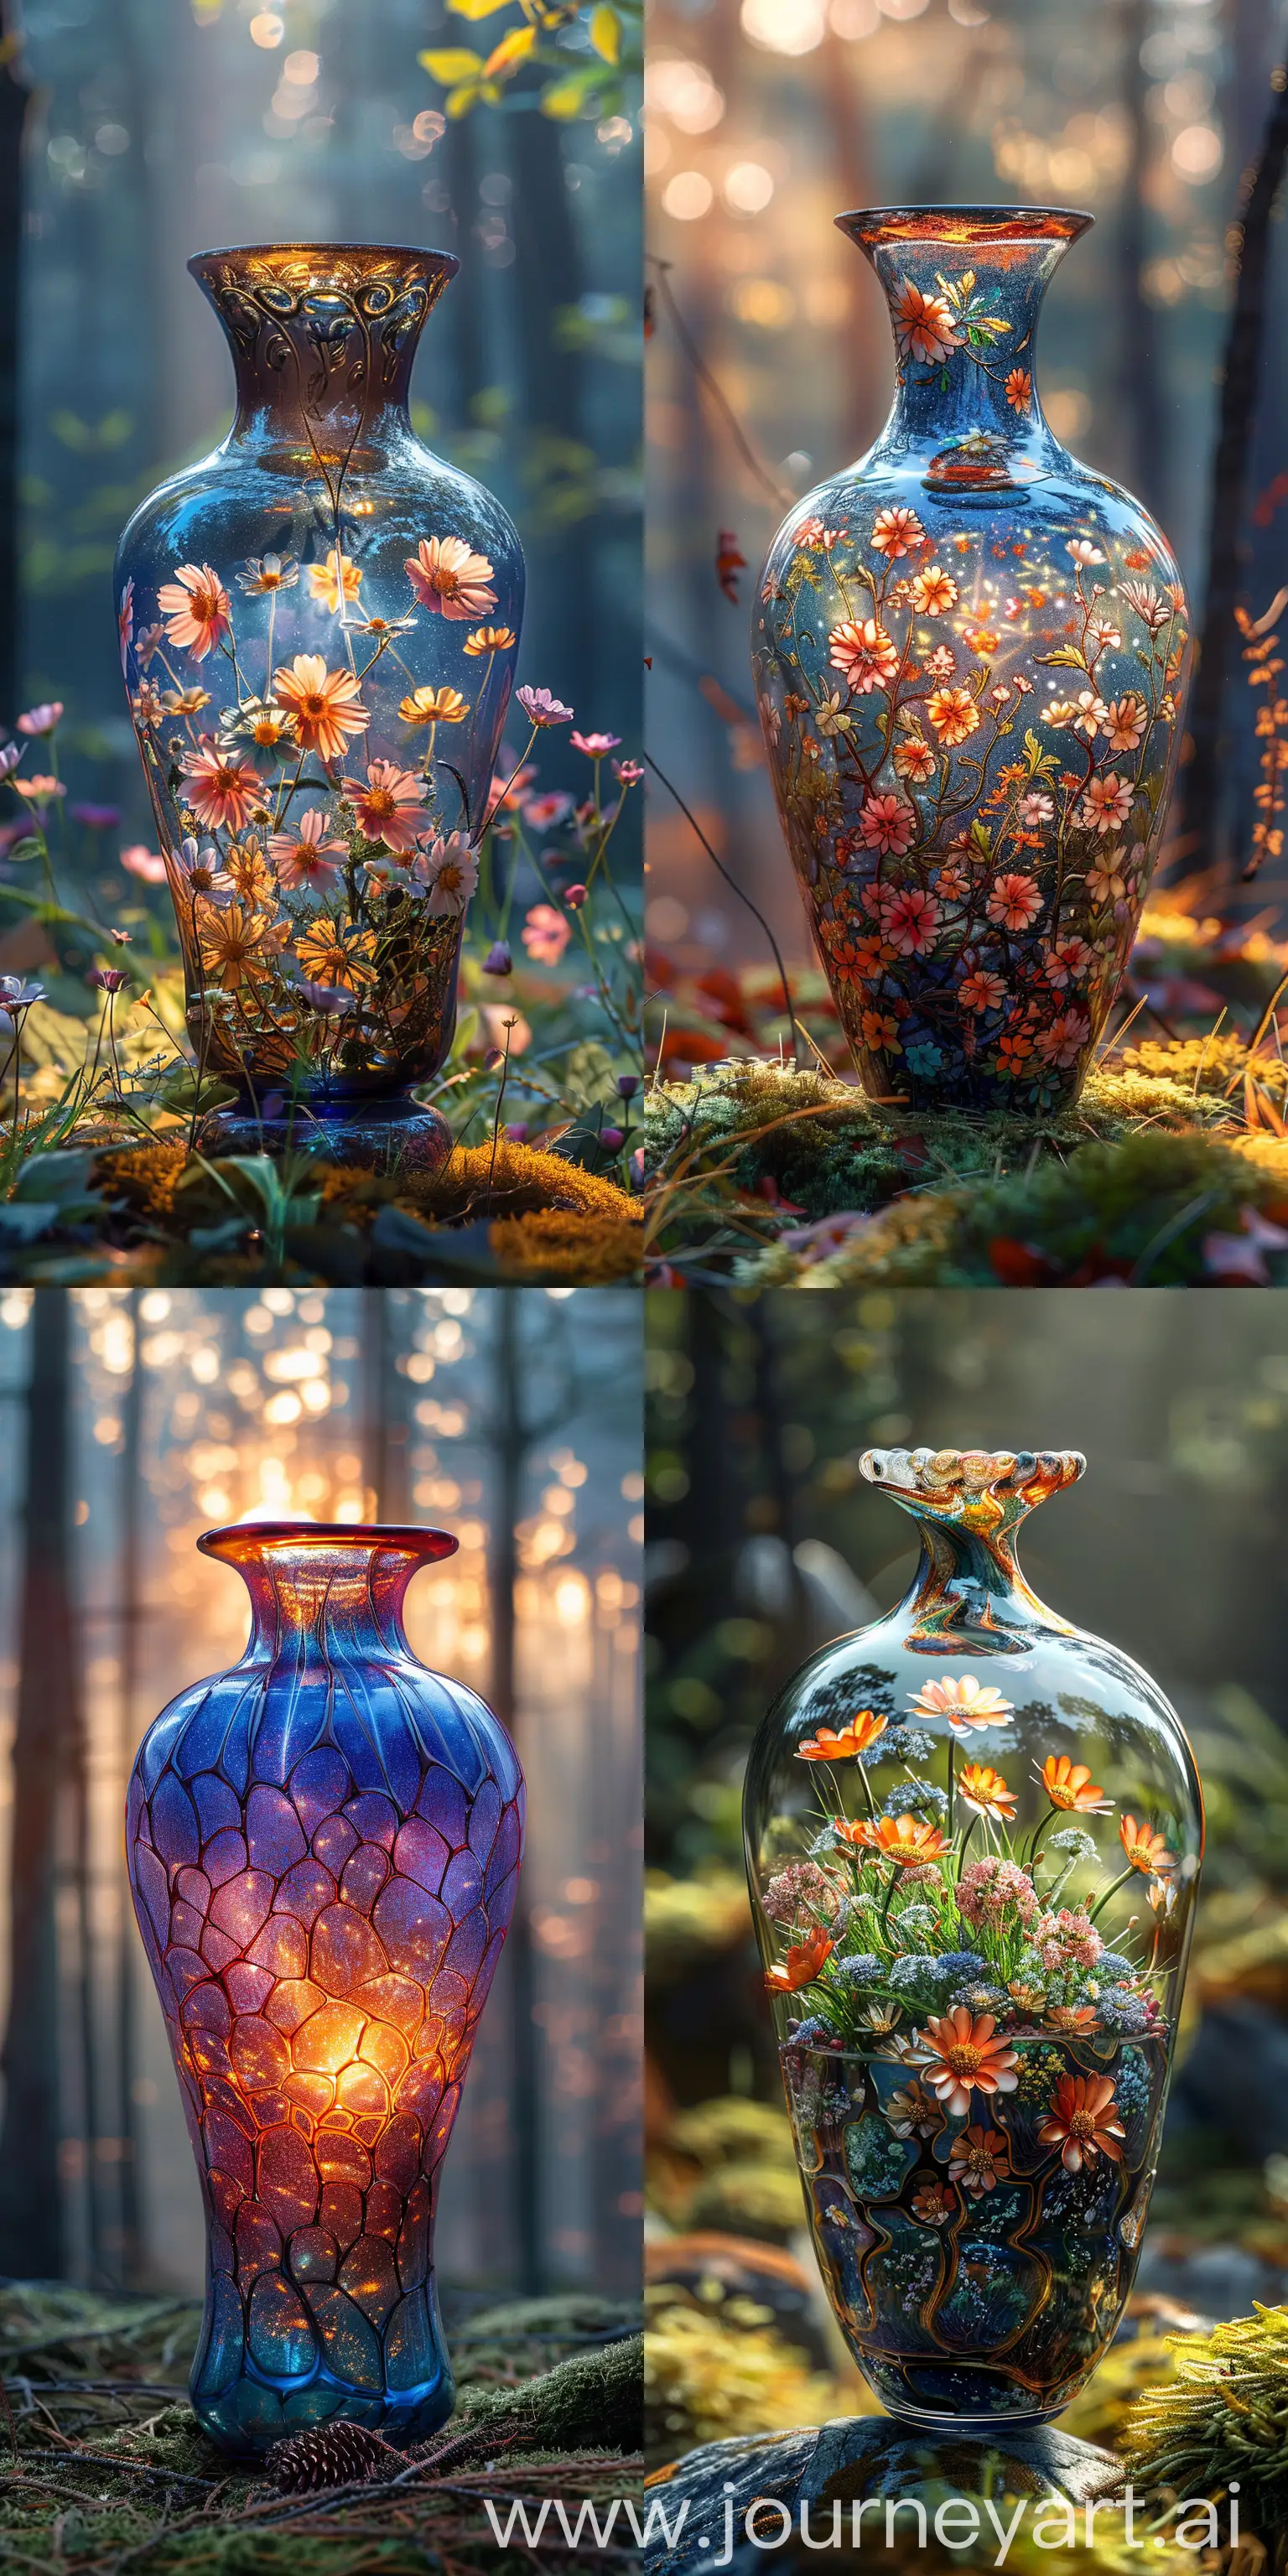 Enchanted-Forest-Vase-with-Colorful-Magical-Life-Inside